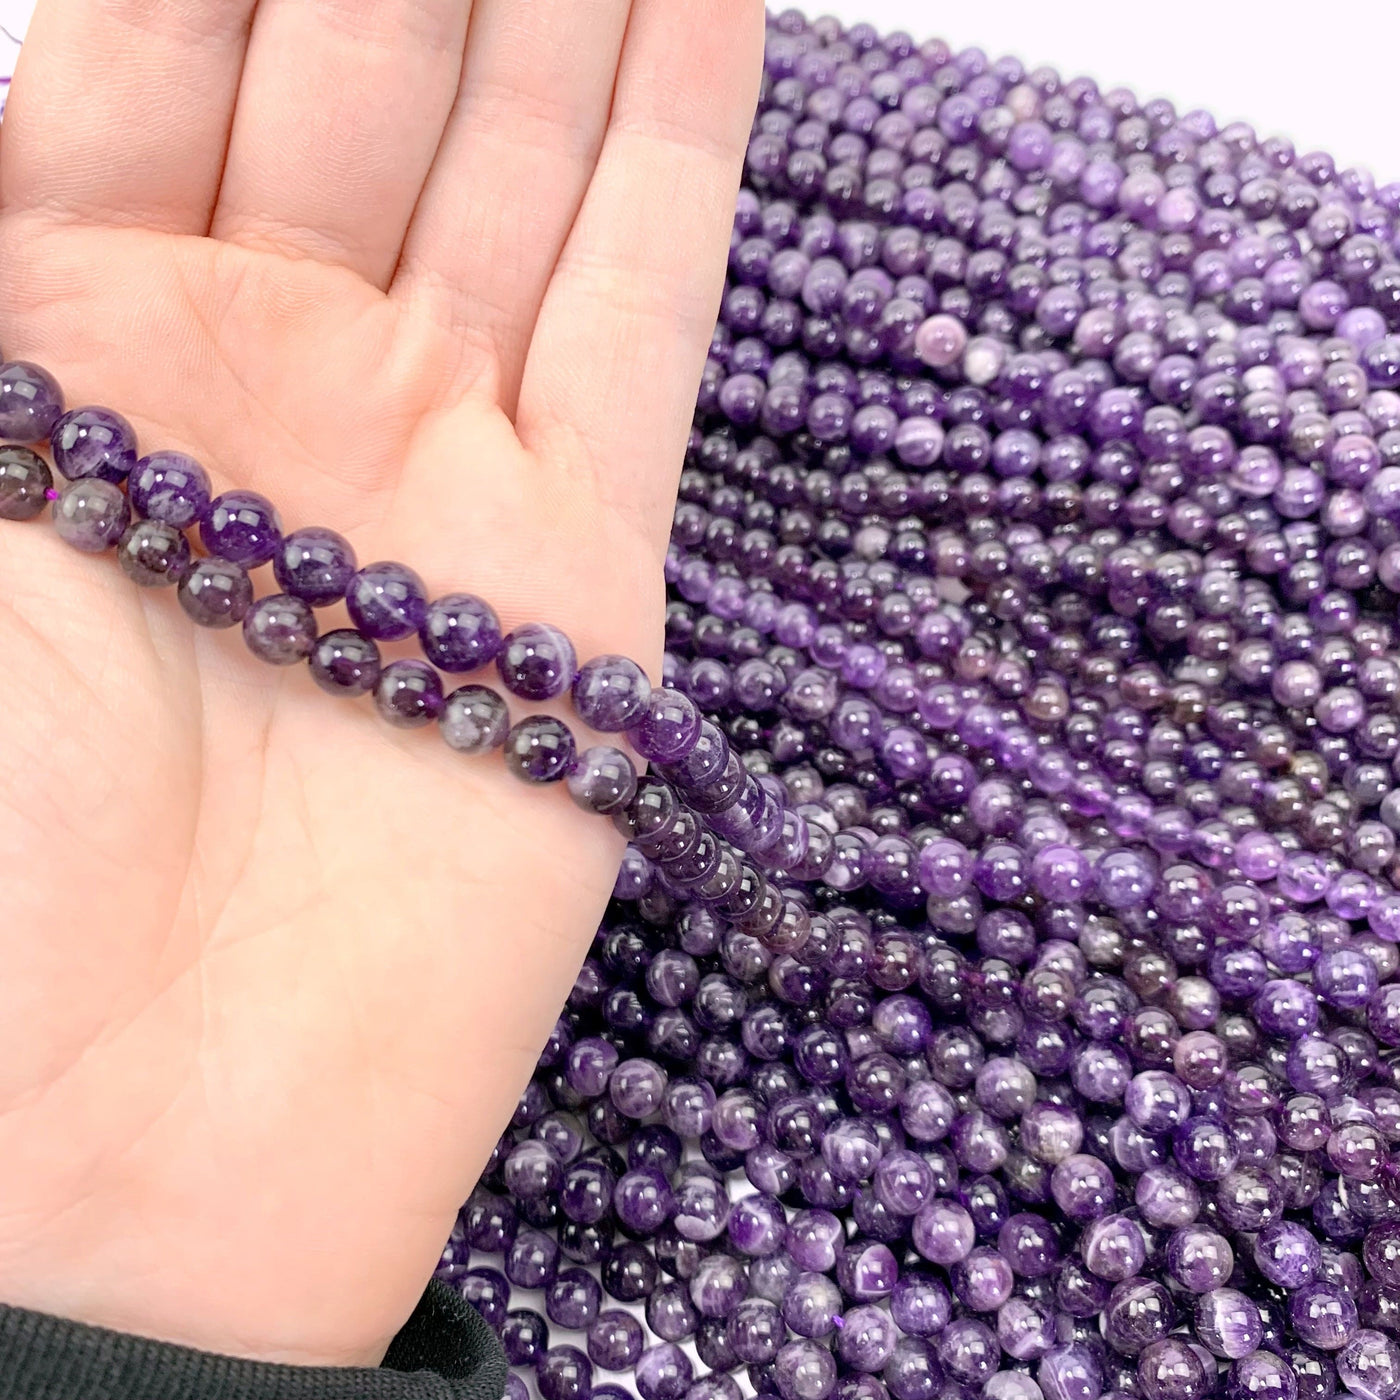 both sizing variations in hand with more amethyst beads in background